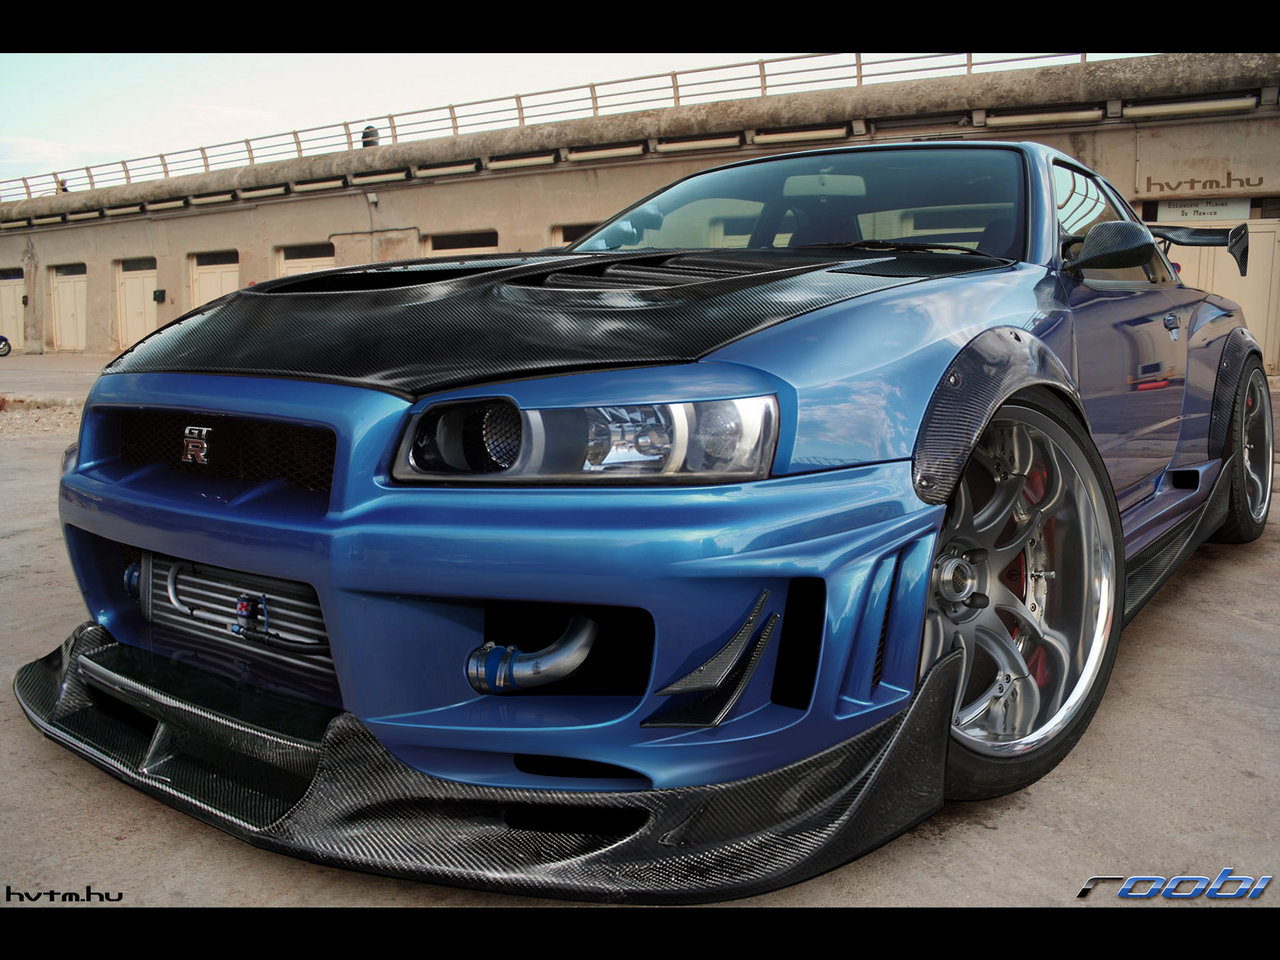 AUTO CARS PROJECT: Nissan Skyline gtr Pictures and Wallpapers